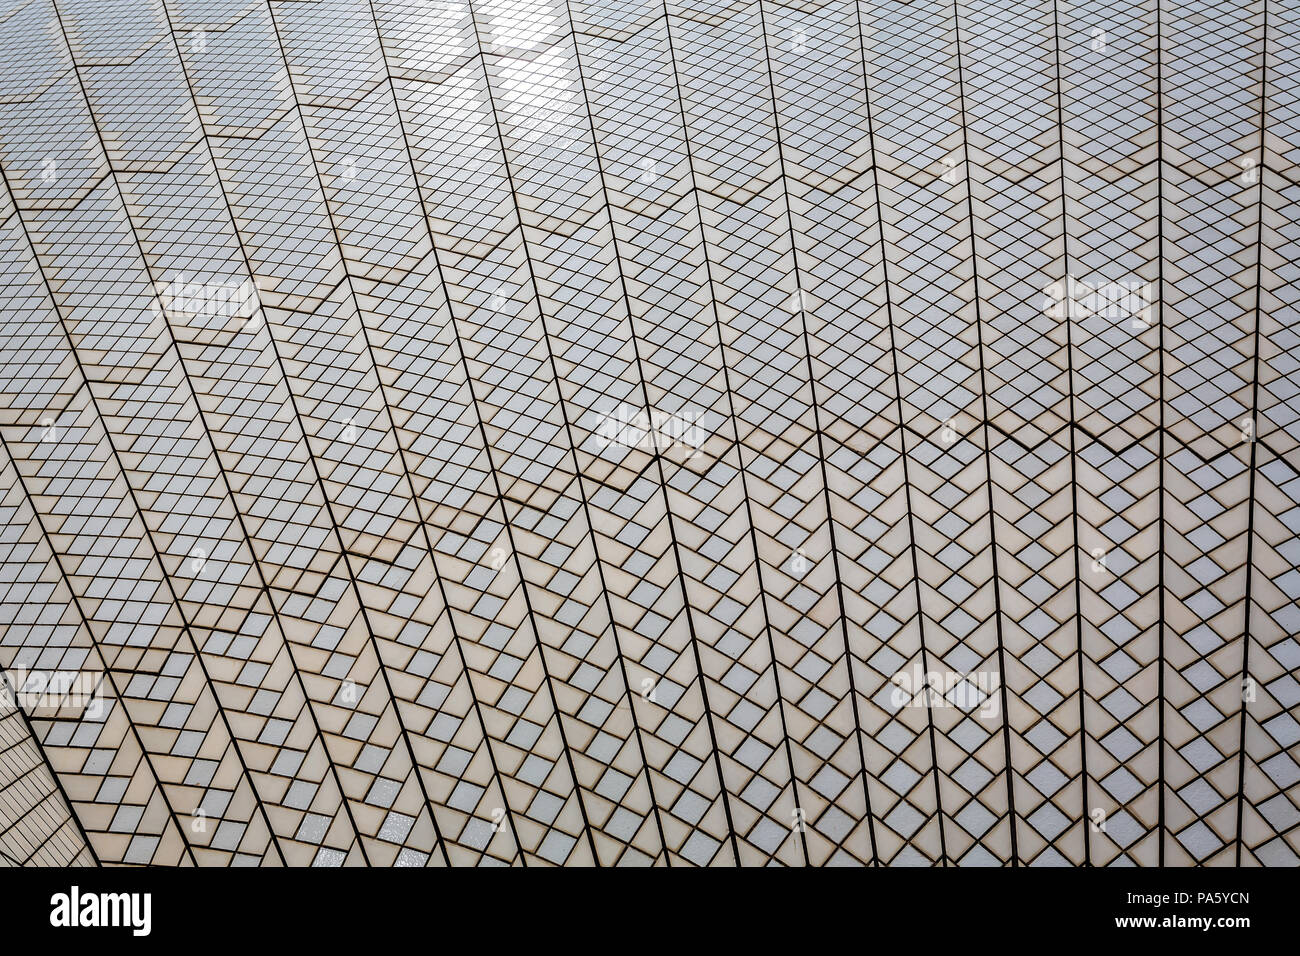 Close up view from inside Sydney Opera House of tiles making up the sails taken in Sydney, NSW, Australia on 3 January 2018 Stock Photo